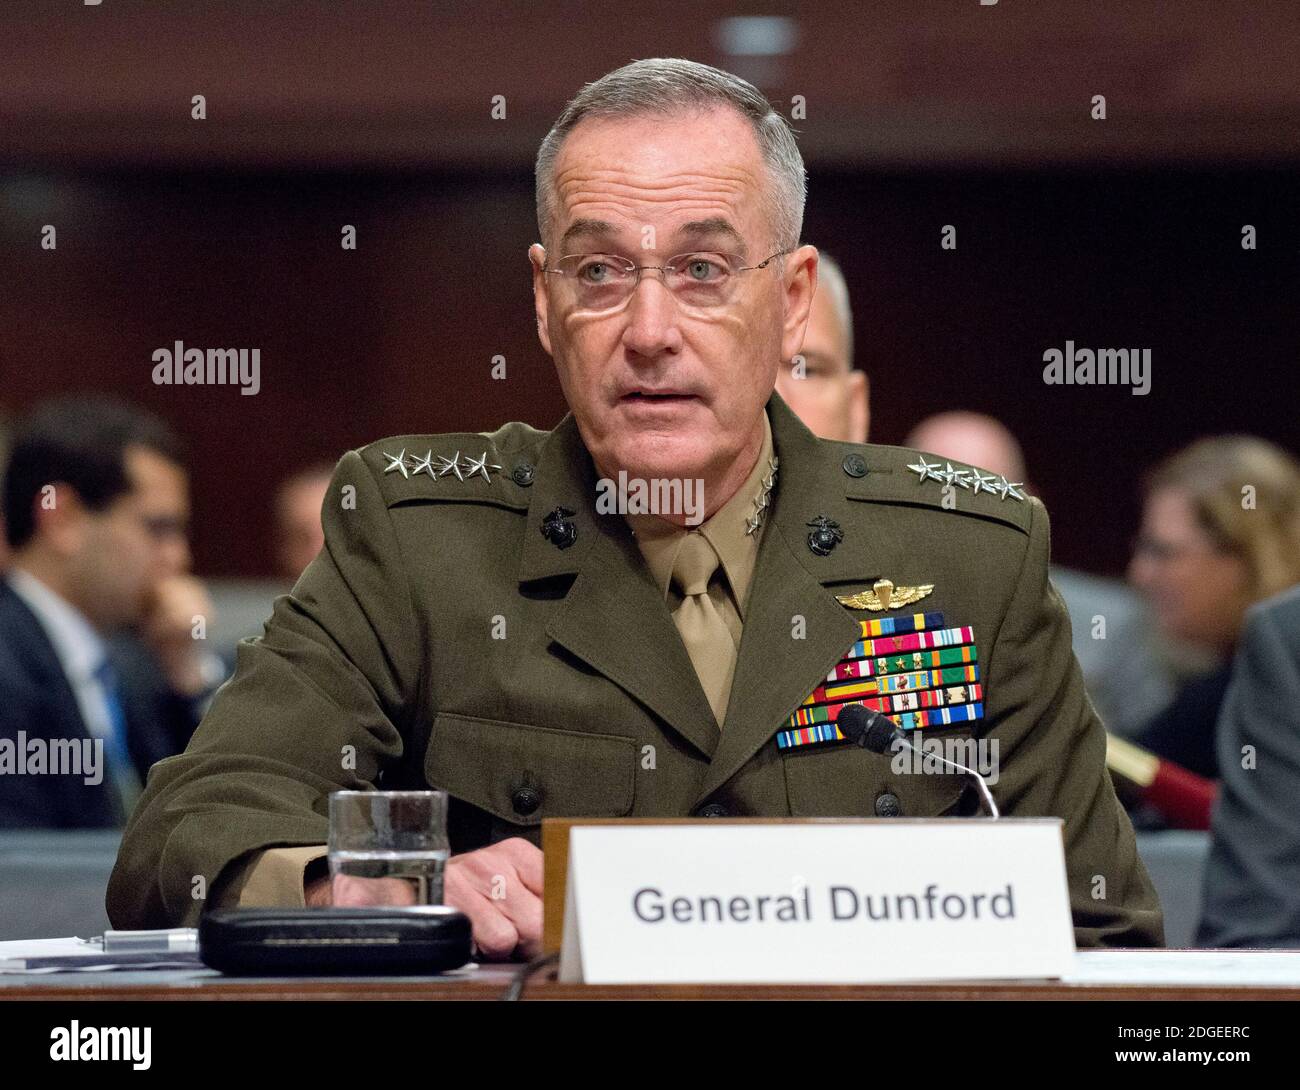 General Joseph F. Dunford, Jr., US Marine Corps, Chairman of the Joint Chiefs of Staff, gives testimony before the US Senate Committee on Armed Services on 'the Department of Defense budget posture in review of the Defense Authorization Request for Fiscal Year 2018 and the Future Years Defense Program' on Capitol Hill in Washington, DC on Tuesday, June 13, 2017.Photo by Ron Sachs / CNP/ABACAPRESS.COM Stock Photo